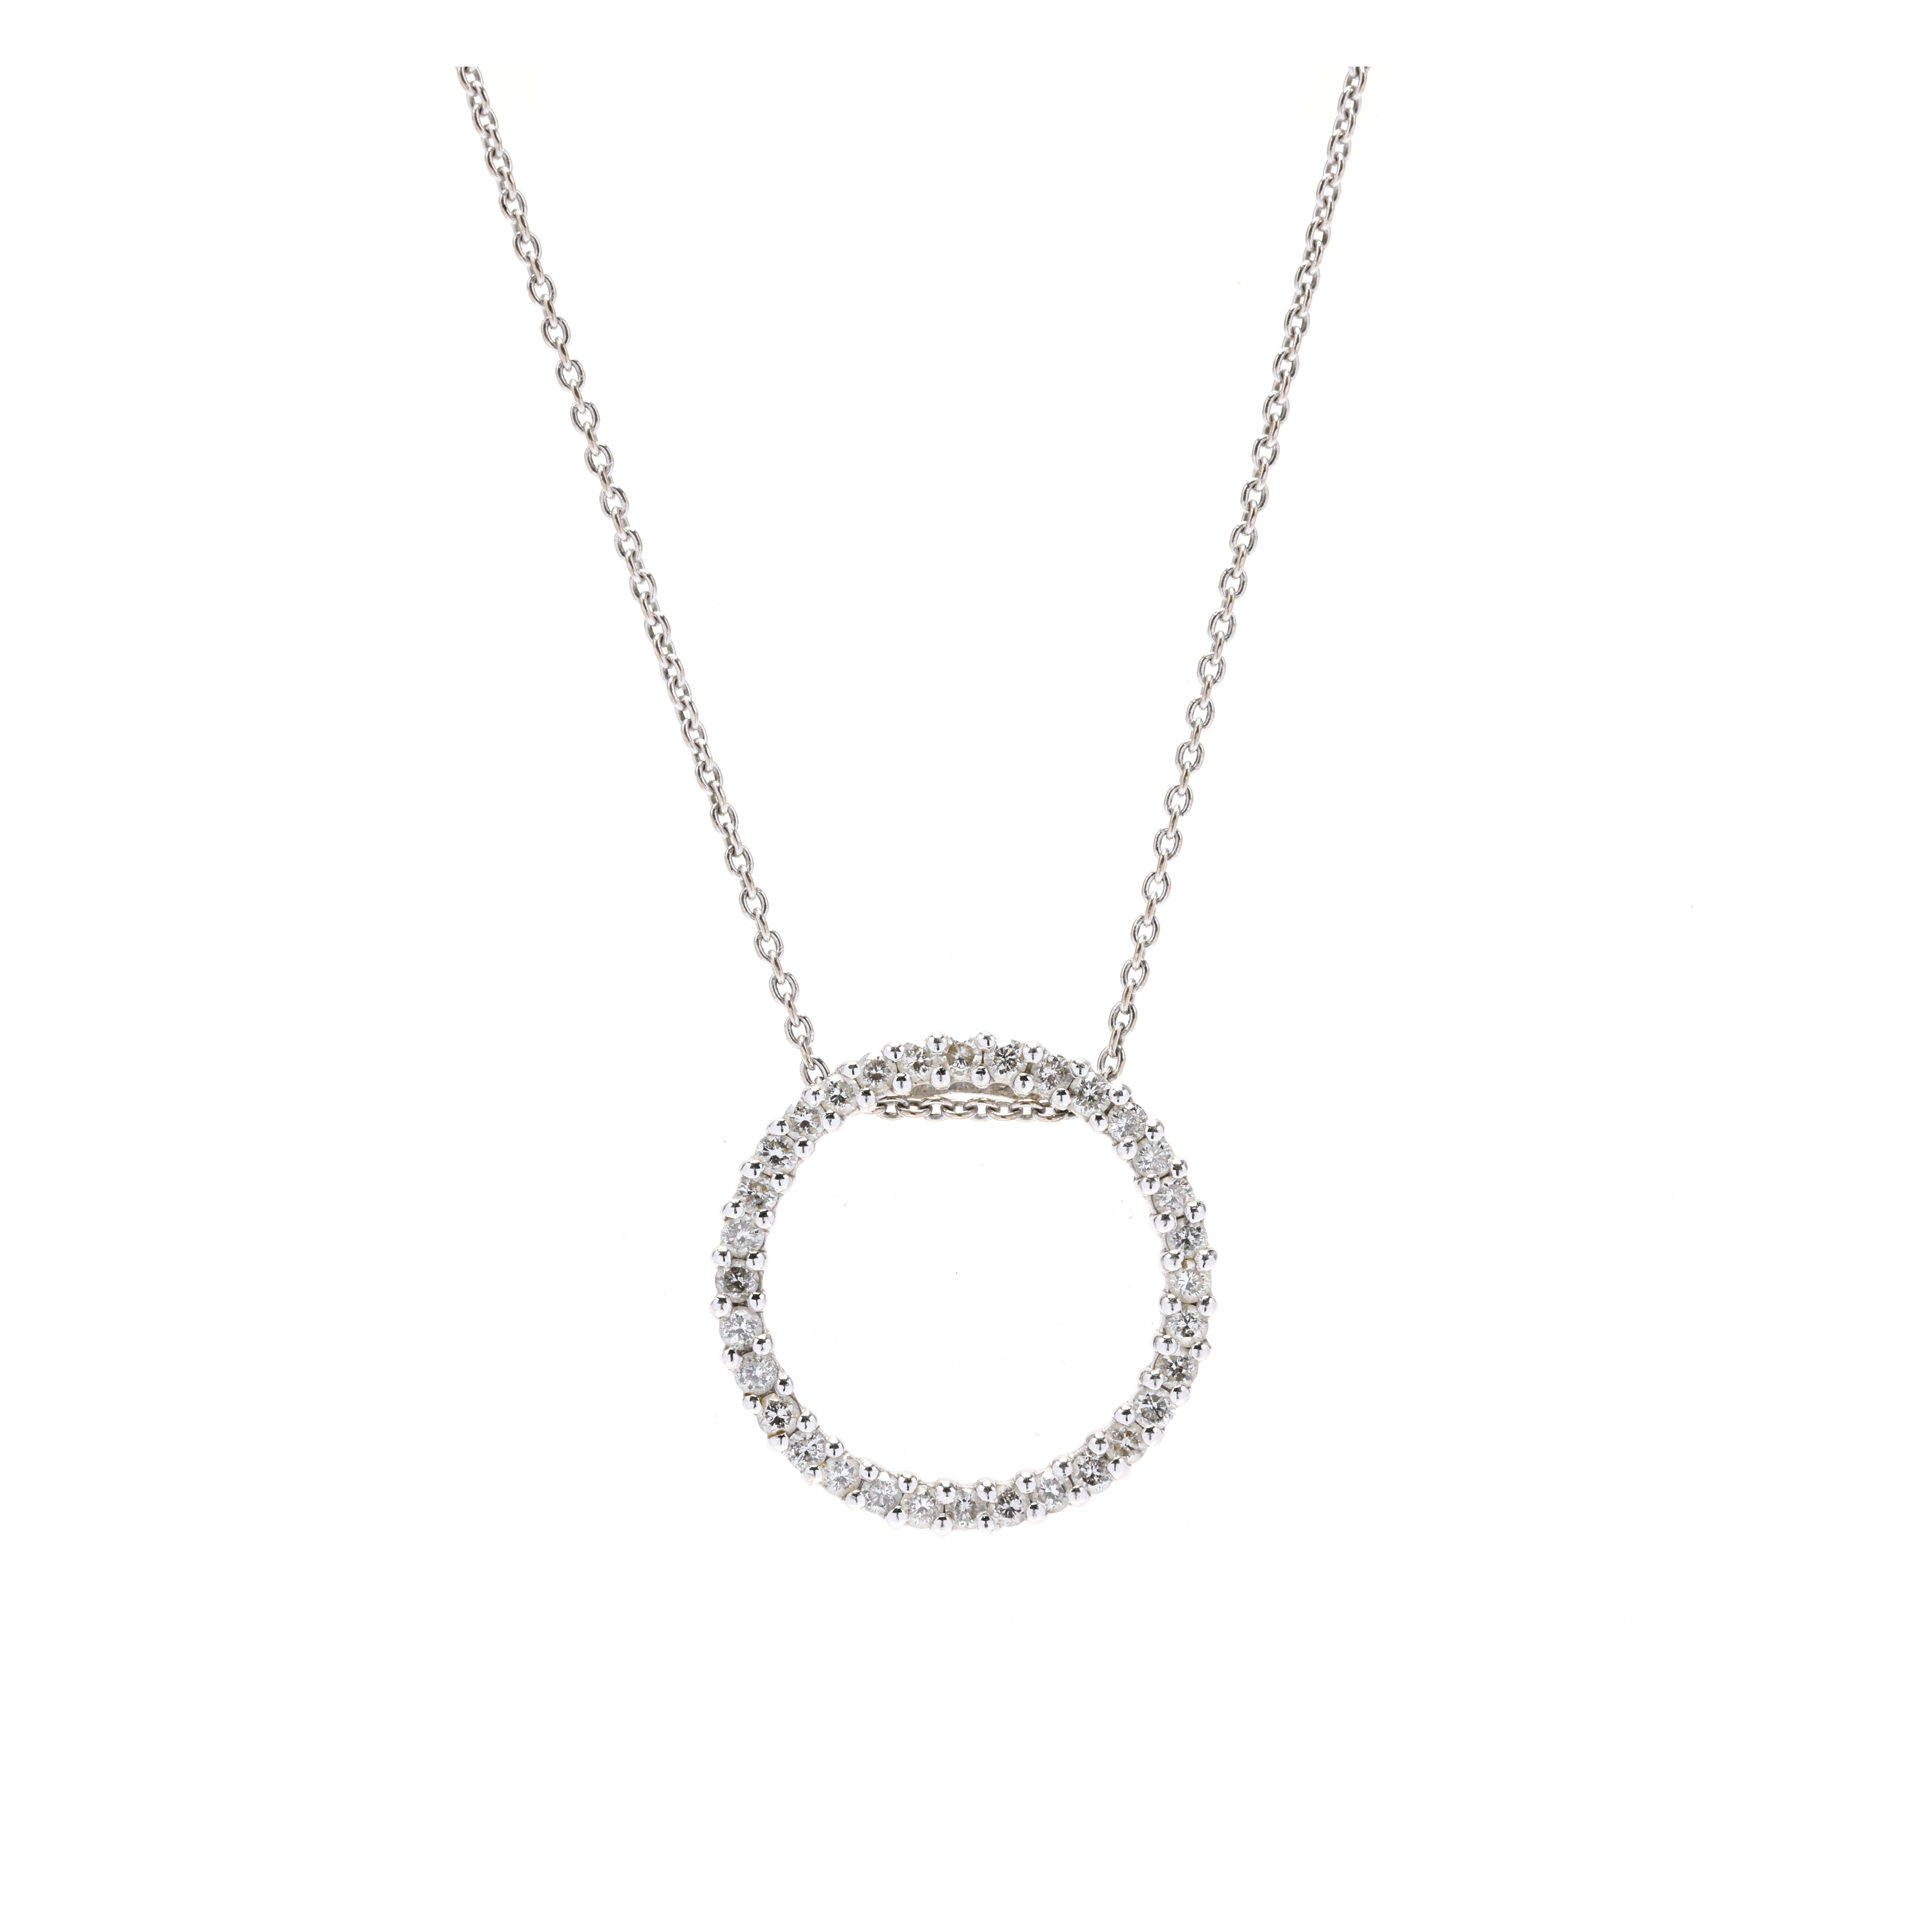 1cwt Diamond Circle Pendant Necklace, 14k White Gold, Length 20 Inches In Good Condition For Sale In McLeansville, NC